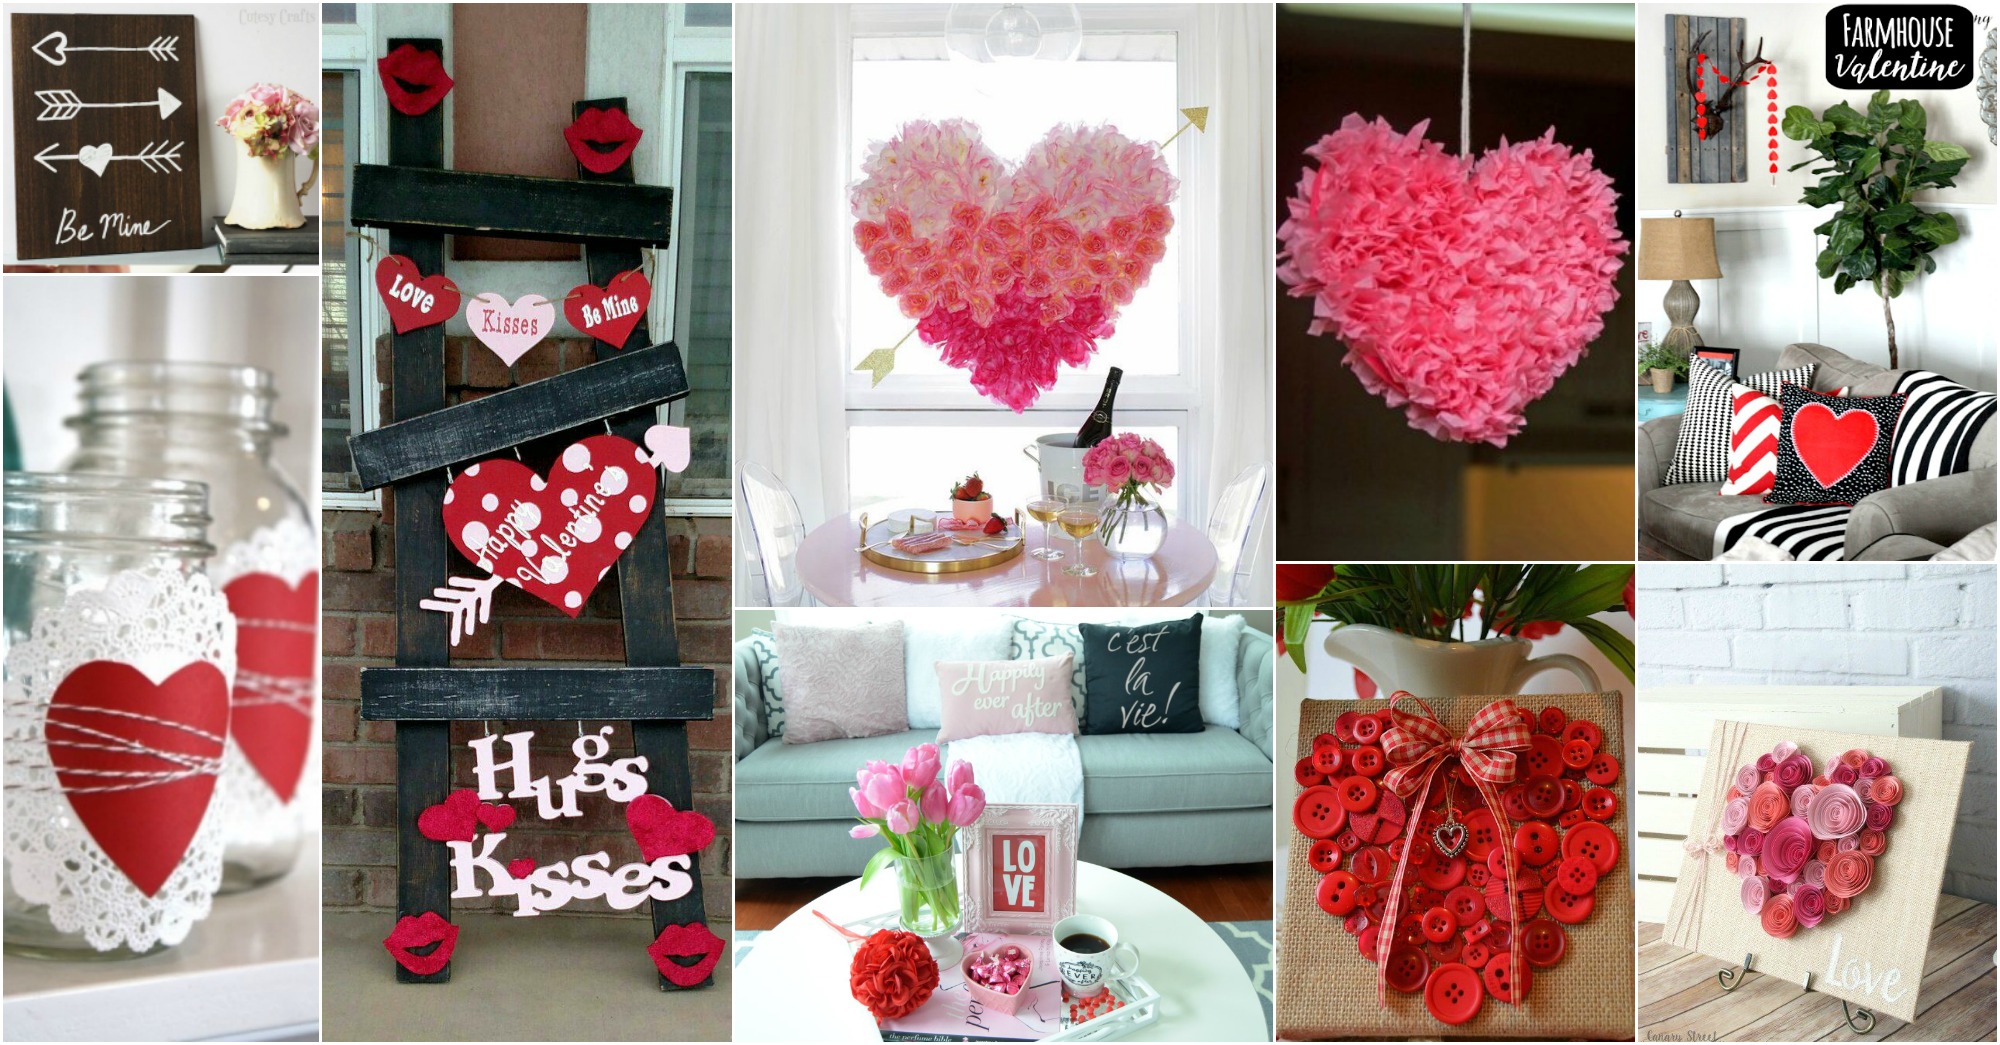 Charming Valentine's Home Decor That Will Brighten Up Your Day